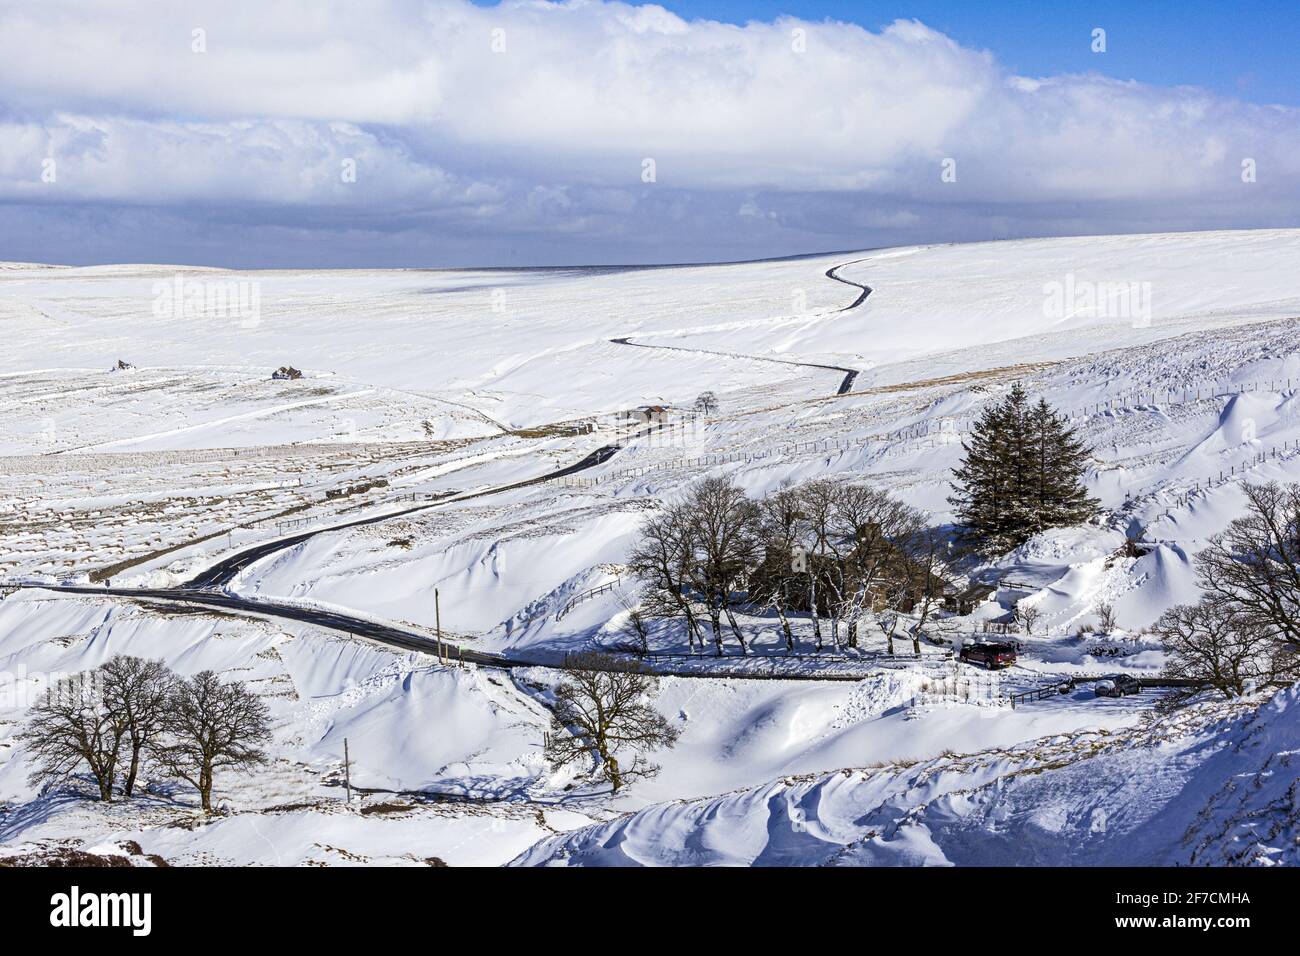 Winter in the Pennines - A snowy landscape at Coalcleugh, Northumberland UK Stock Photo